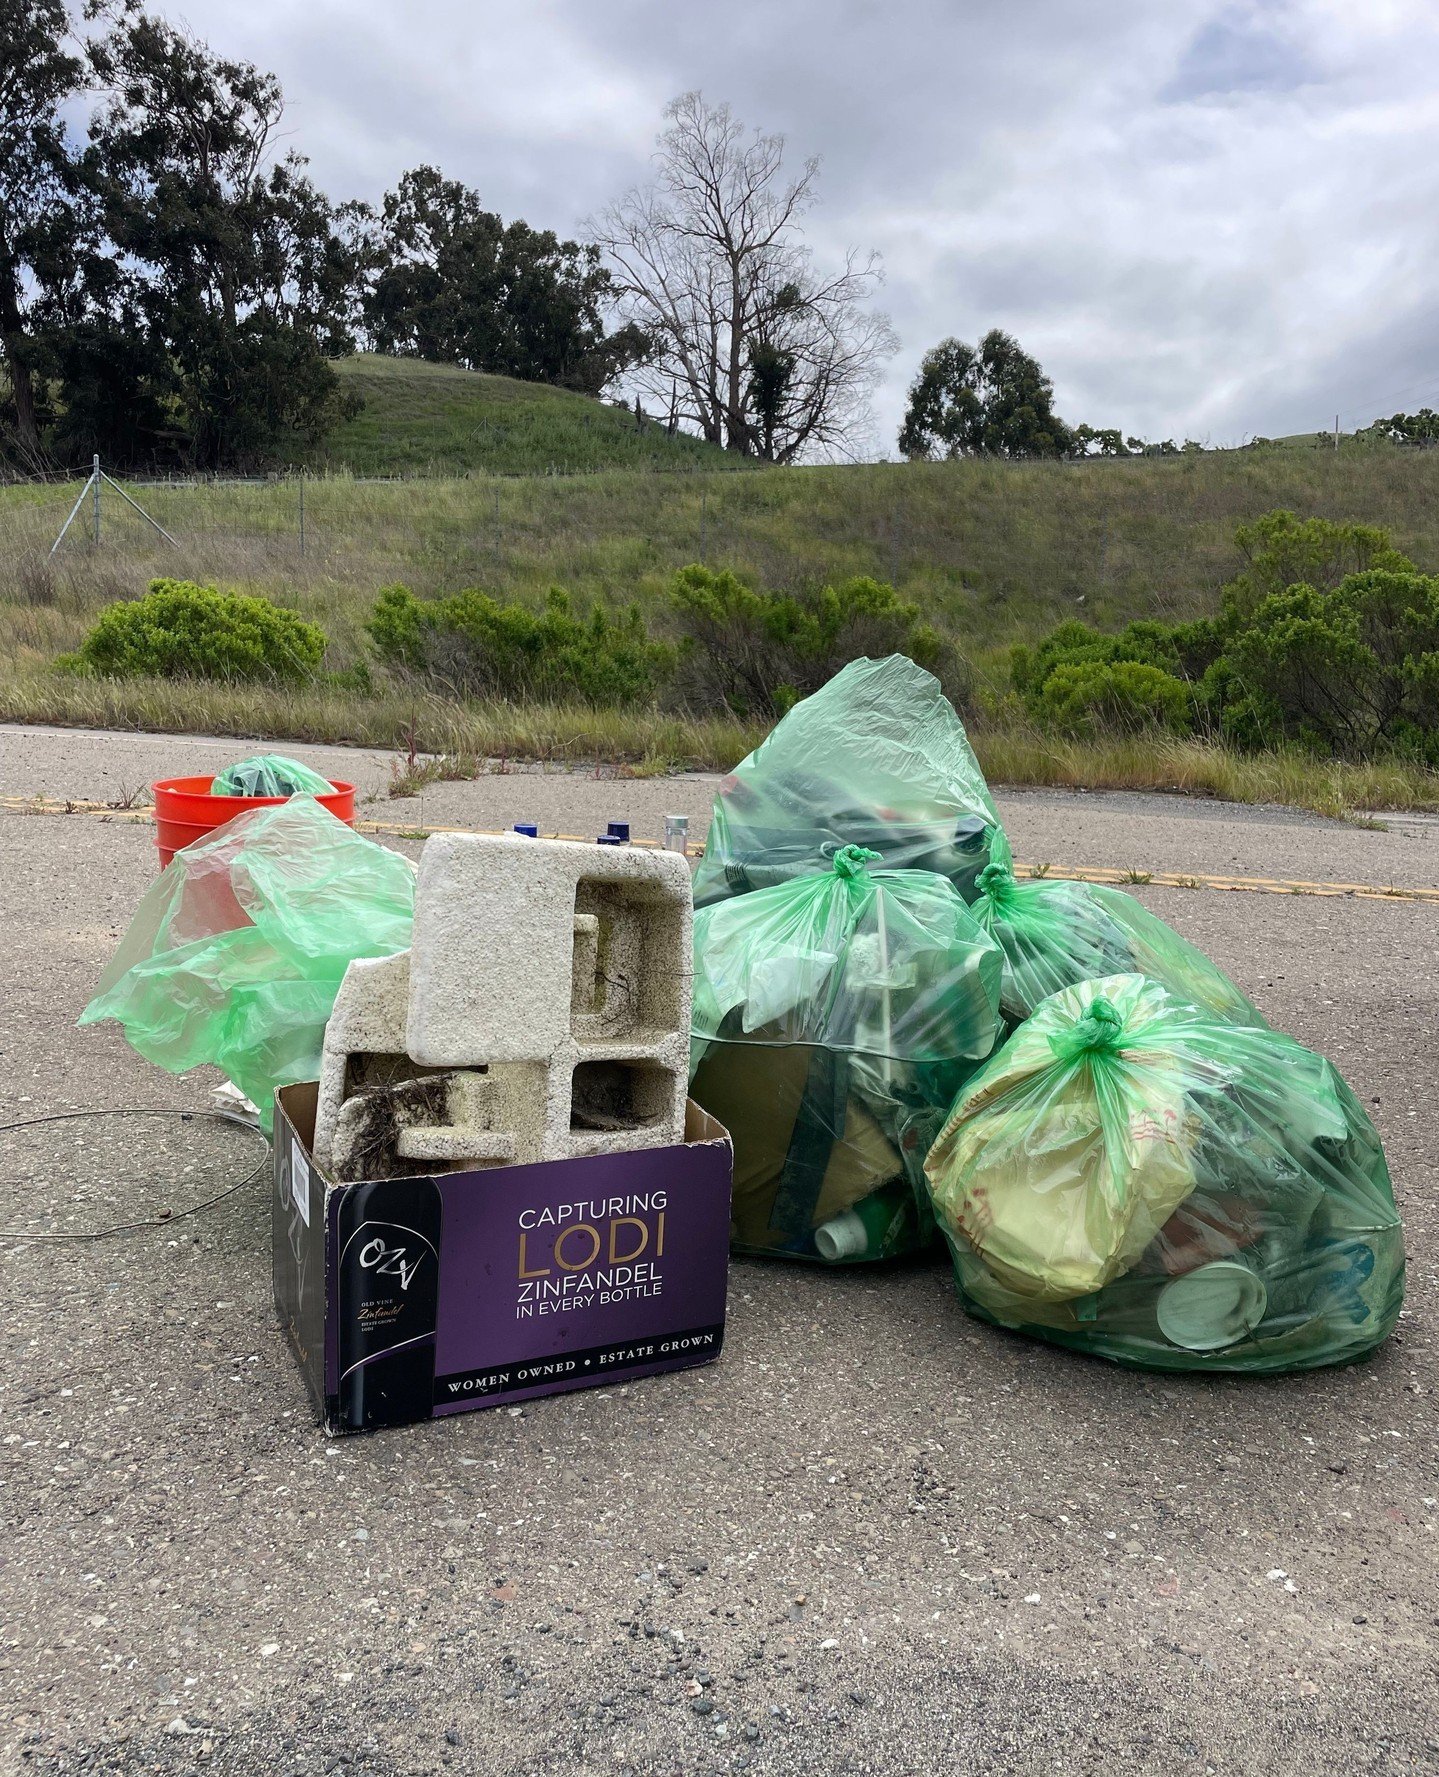 Shoutout to TVC staff and volunteers who spent 2 hours picking up trash at our protected Tiger Salamander property in Pleasanton! 🦎 ⁠
⁠
In preparation for our Step Into Spring event, they filled multiple 13-gallon trash bags with waste. ⁠
⁠
Please h